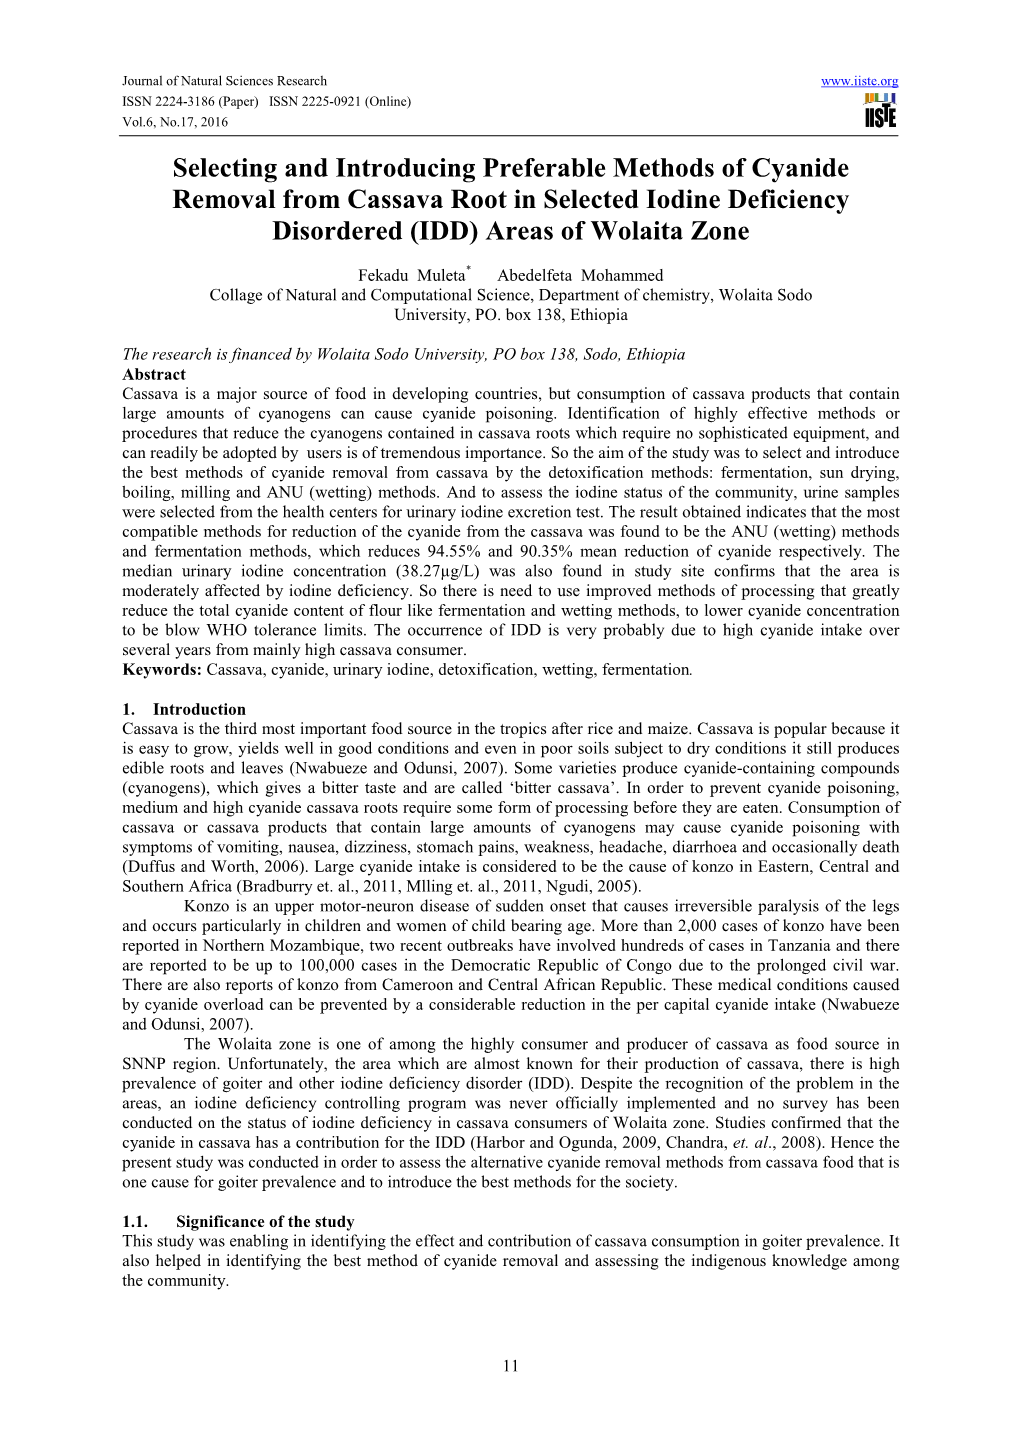 Selecting and Introducing Preferable Methods of Cyanide Removal from Cassava Root in Selected Iodine Deficiency Disordered (IDD) Areas of Wolaita Zone